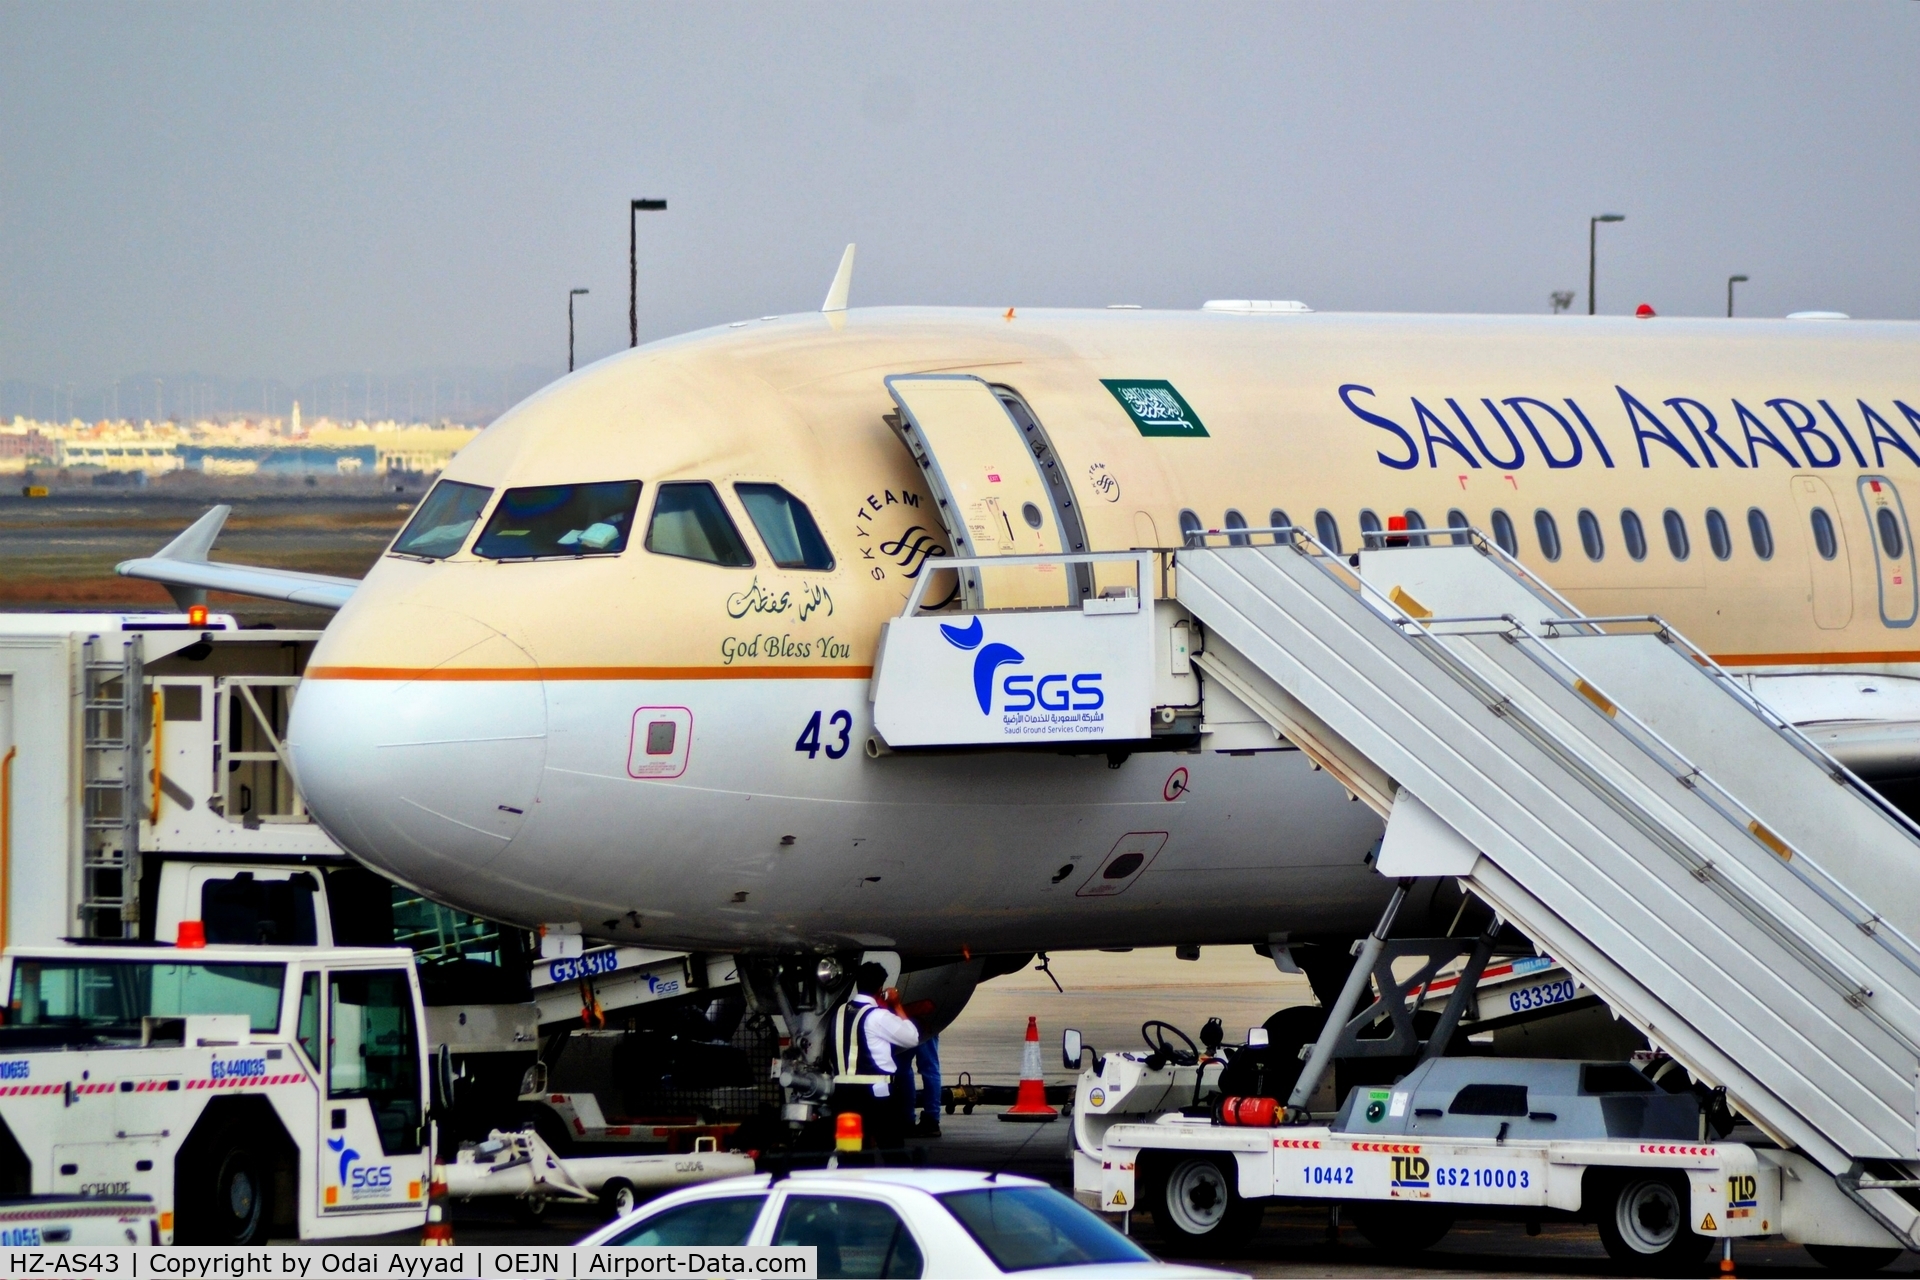 HZ-AS43, Airbus A320-214 C/N 4517, At Jeddah airport